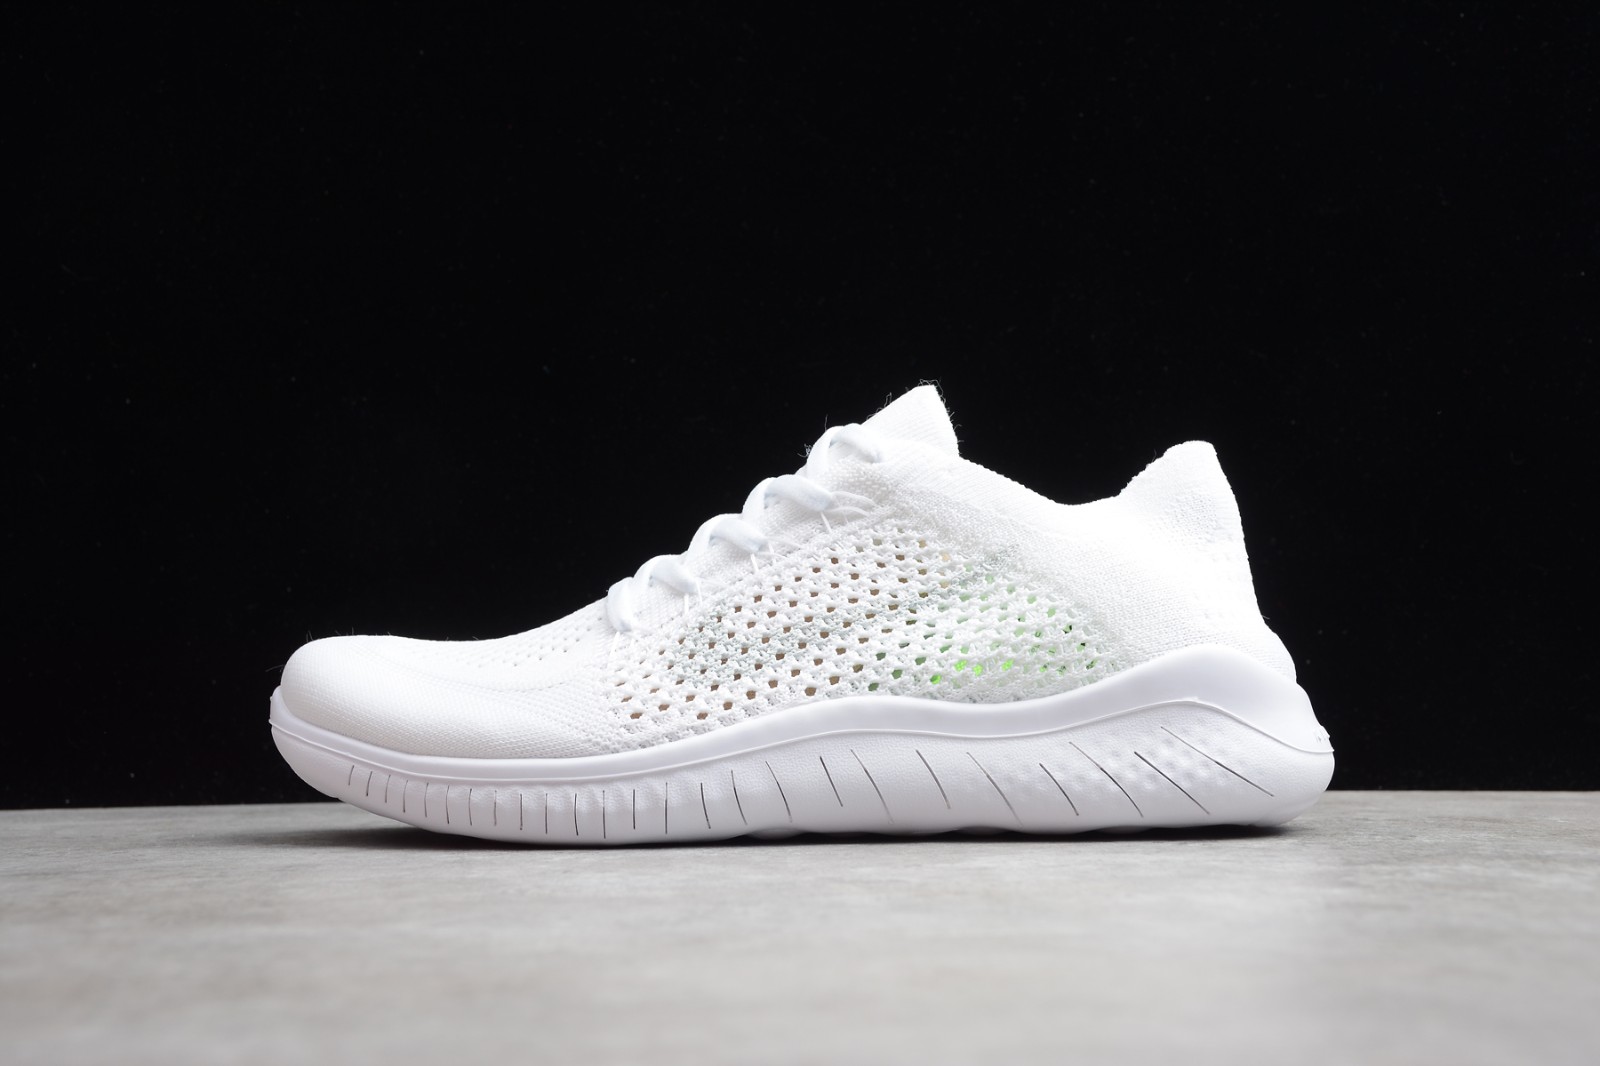 GmarShops - New Nike Free RN Flyknit 2018 Triple White Running Shoes 942838 - nike air max 90 gray color 103